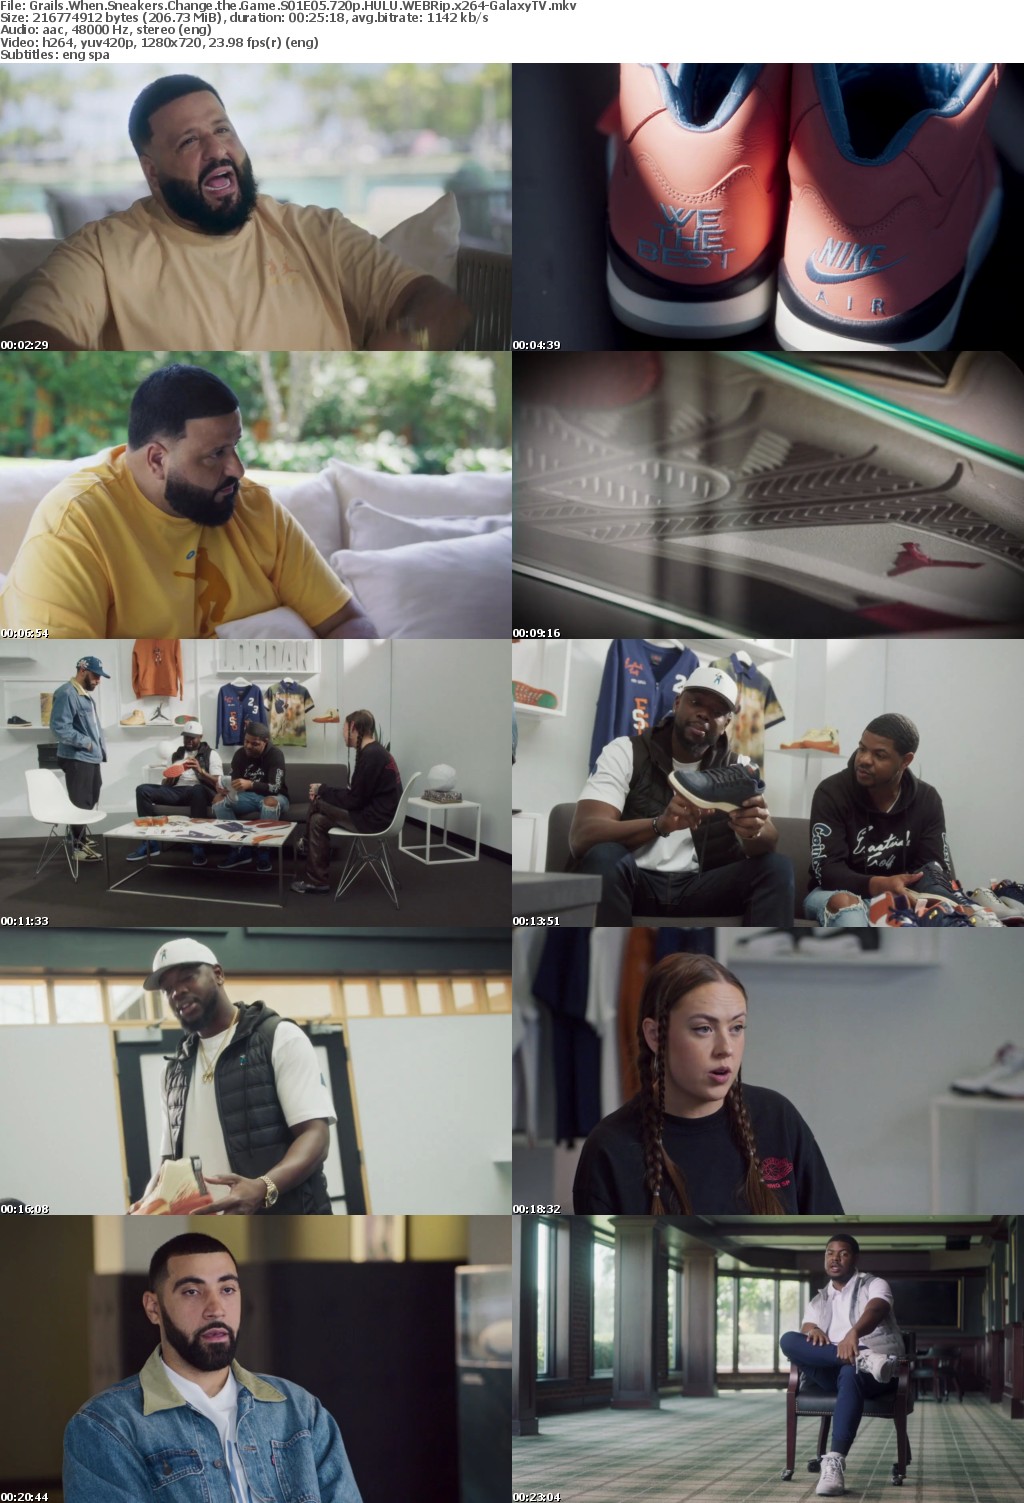 Grails When Sneakers Change the Game S01 COMPLETE 720p HULU WEBRip x264-GalaxyTV